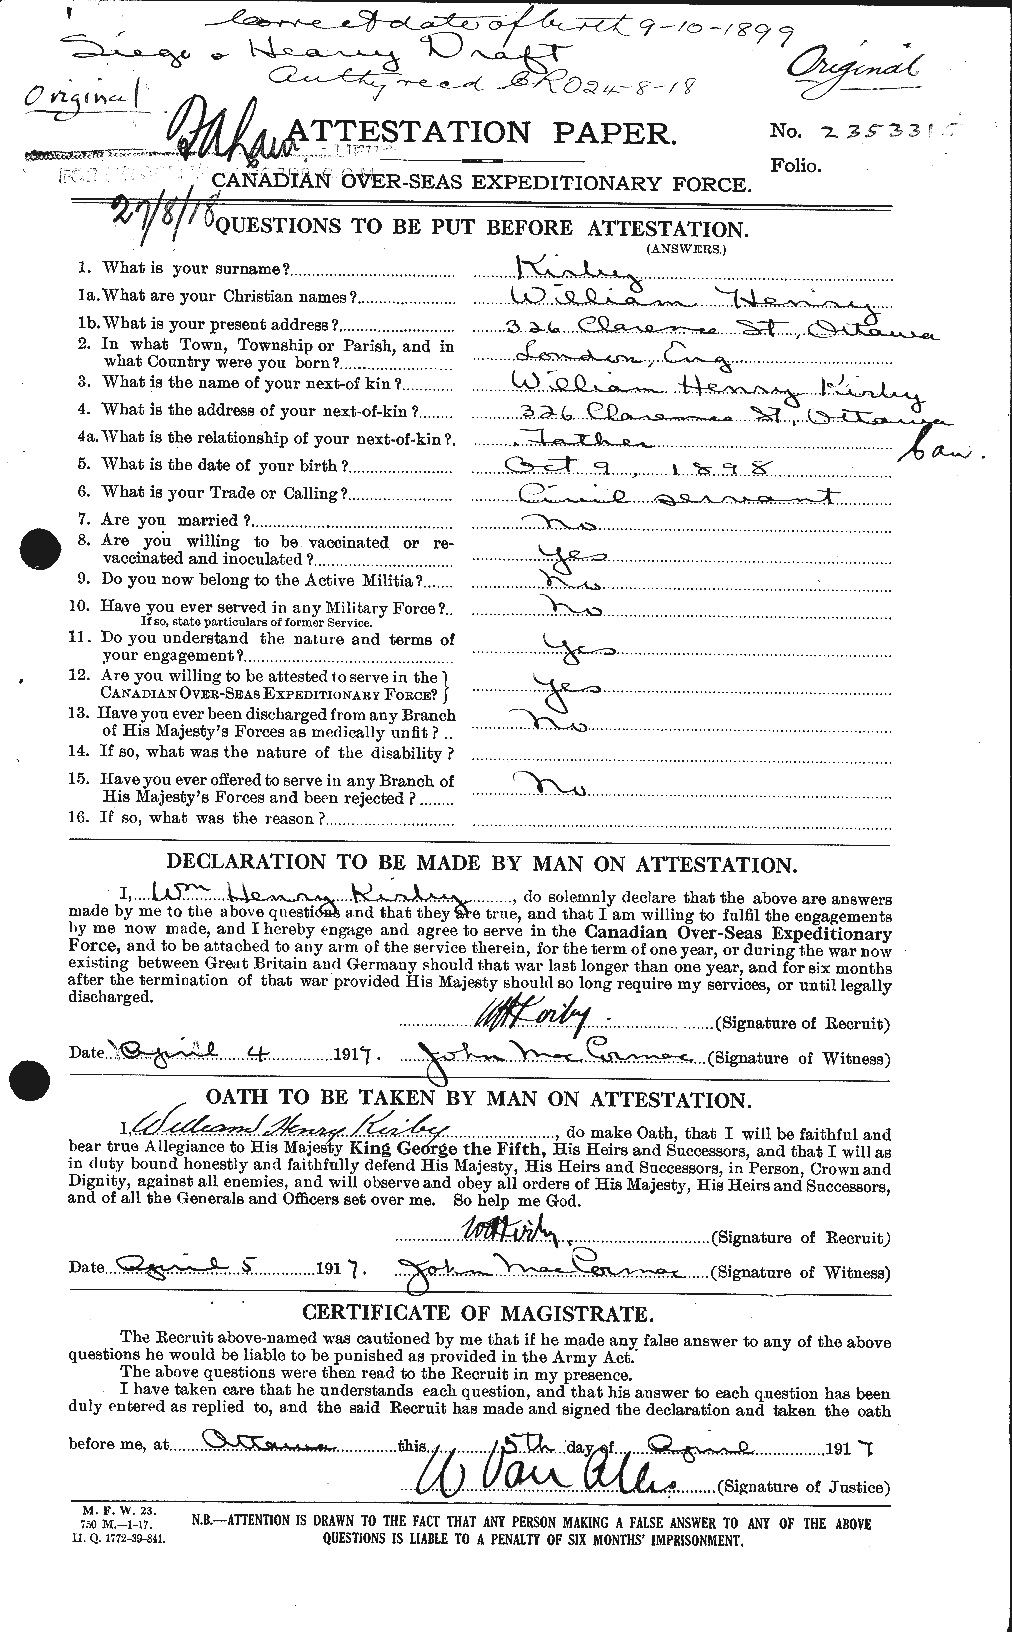 Personnel Records of the First World War - CEF 437297a